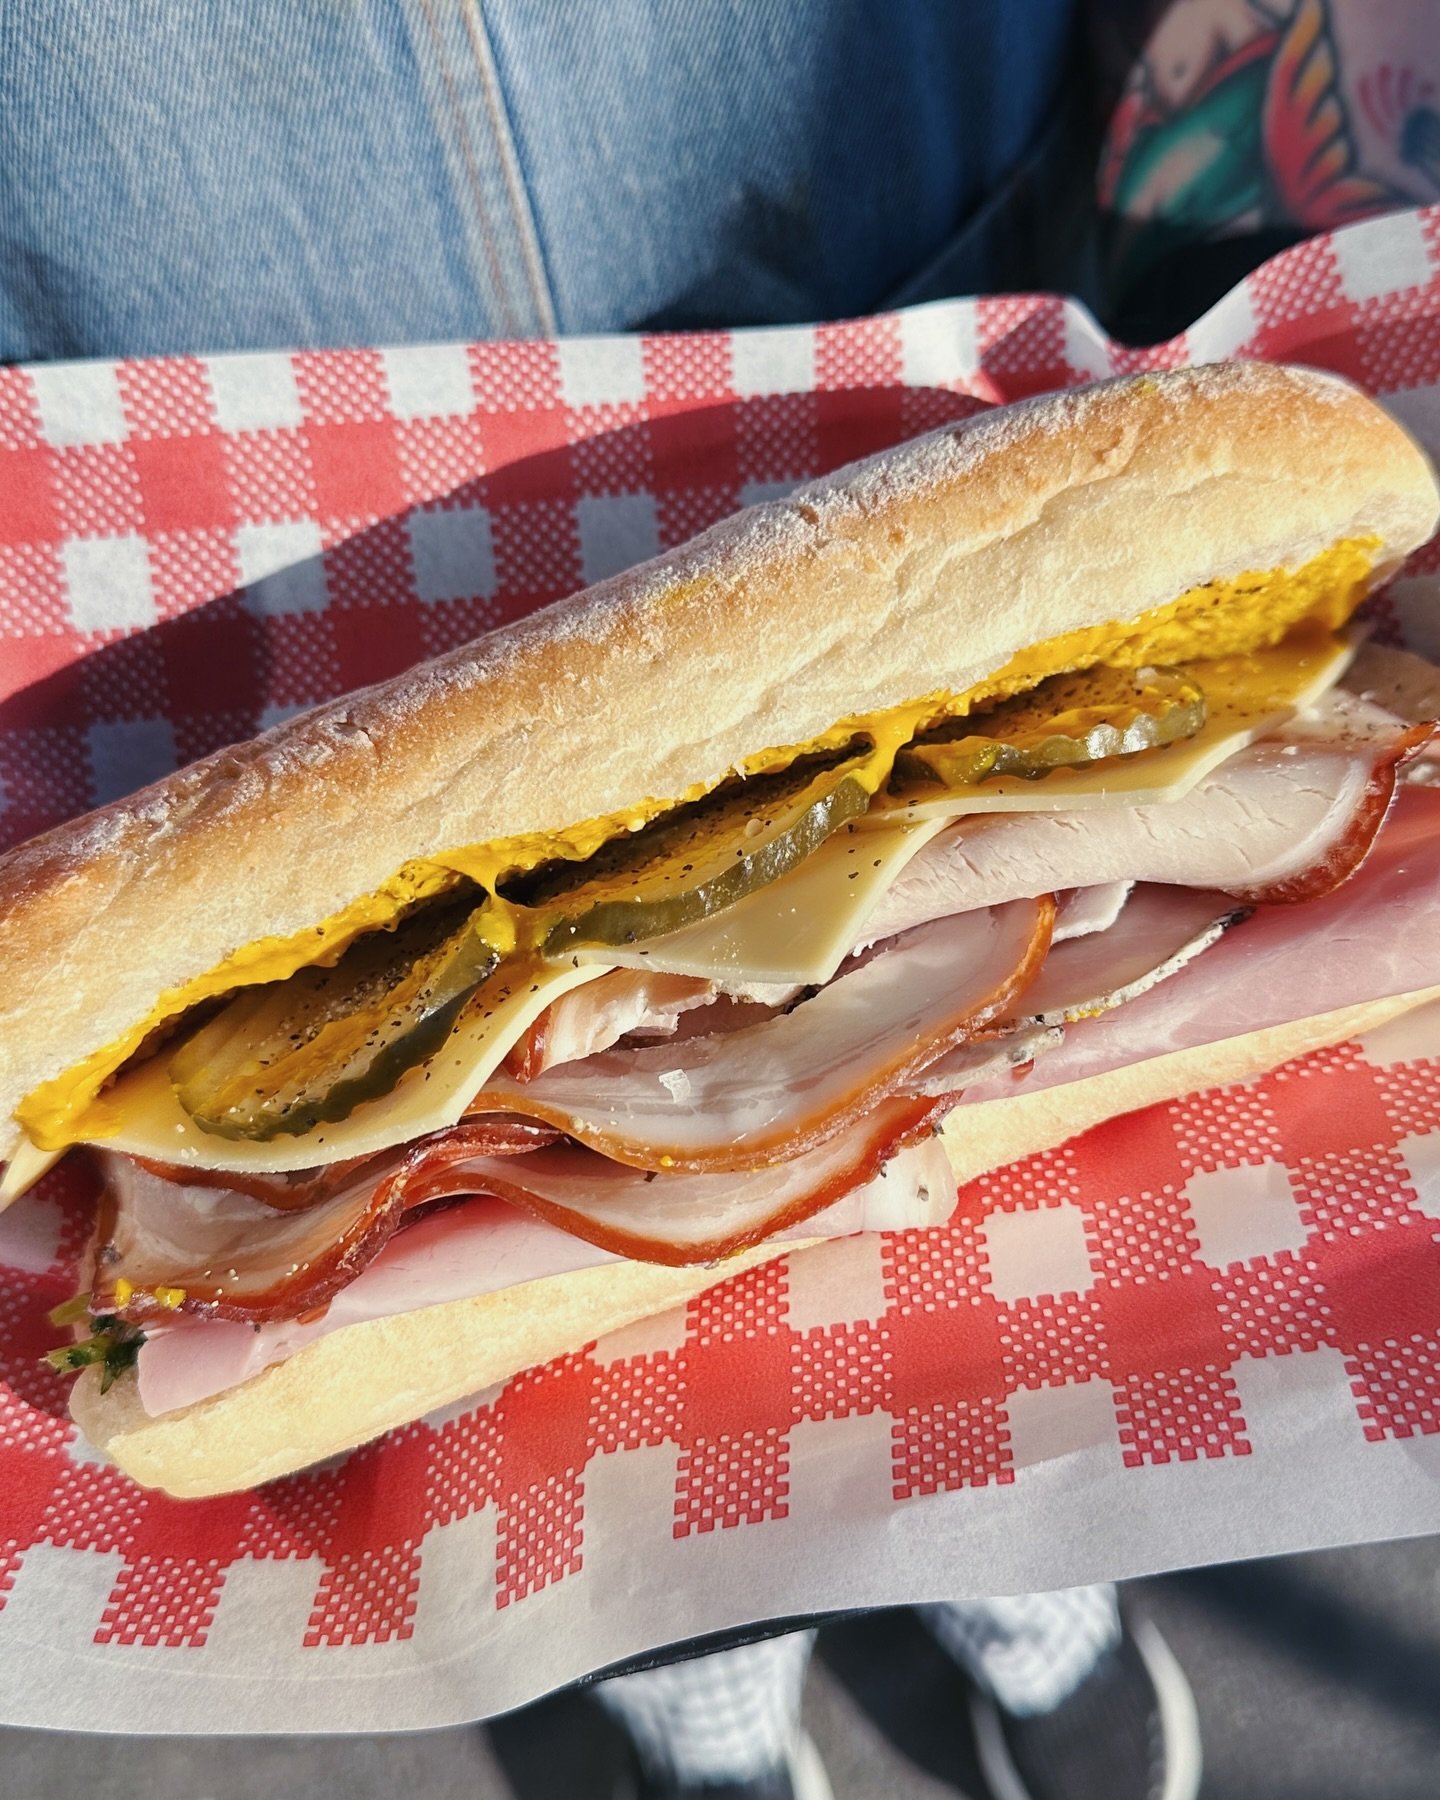 Our roll of the month for May is THE CUBANO 🥓 sliced roast pork and sliced ham with cheese, dill pickles, habanero mustard and our special mojo pesto, all on a @lamadrebakery long ciabatta. Every day until sold out!